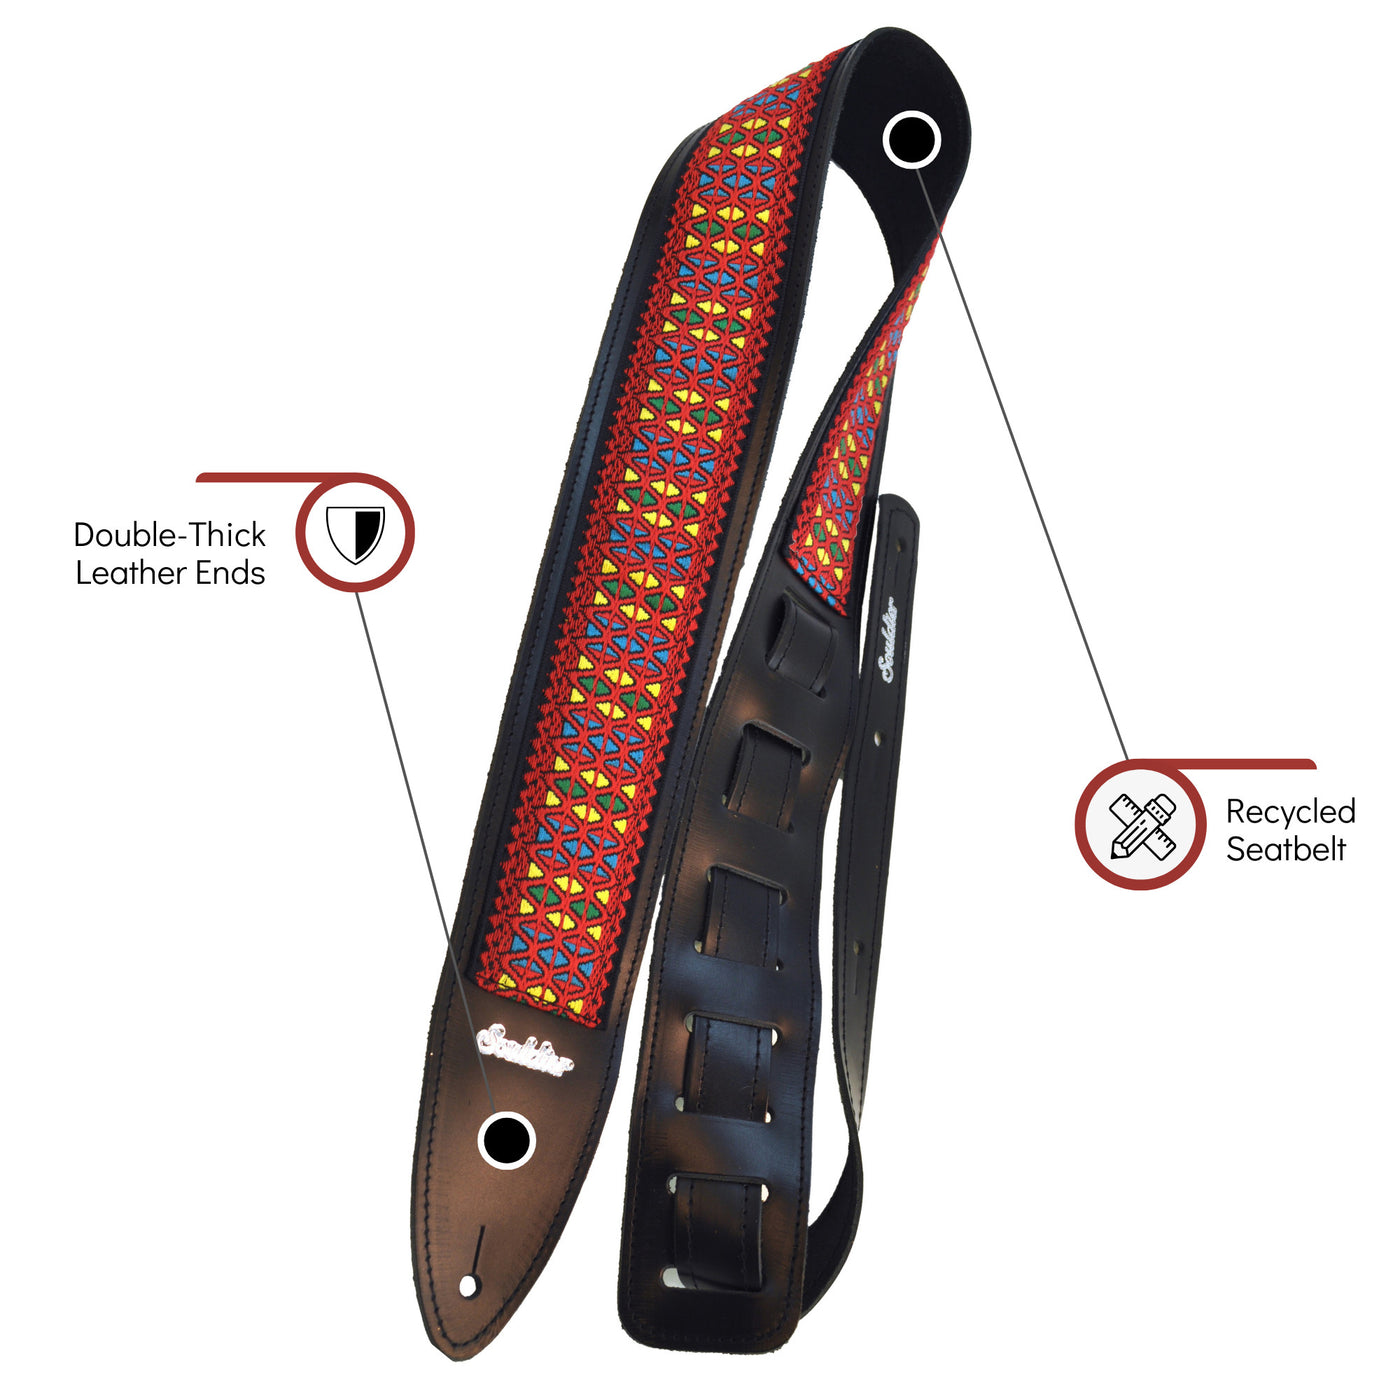 Souldier TGS1222BK02BK - Handmade Souldier Fabric Torpedo Strap for Bass, Electric, or Acoustic Guitar, Adjustable Length from 42.5" to 55" Made in the USA, Red